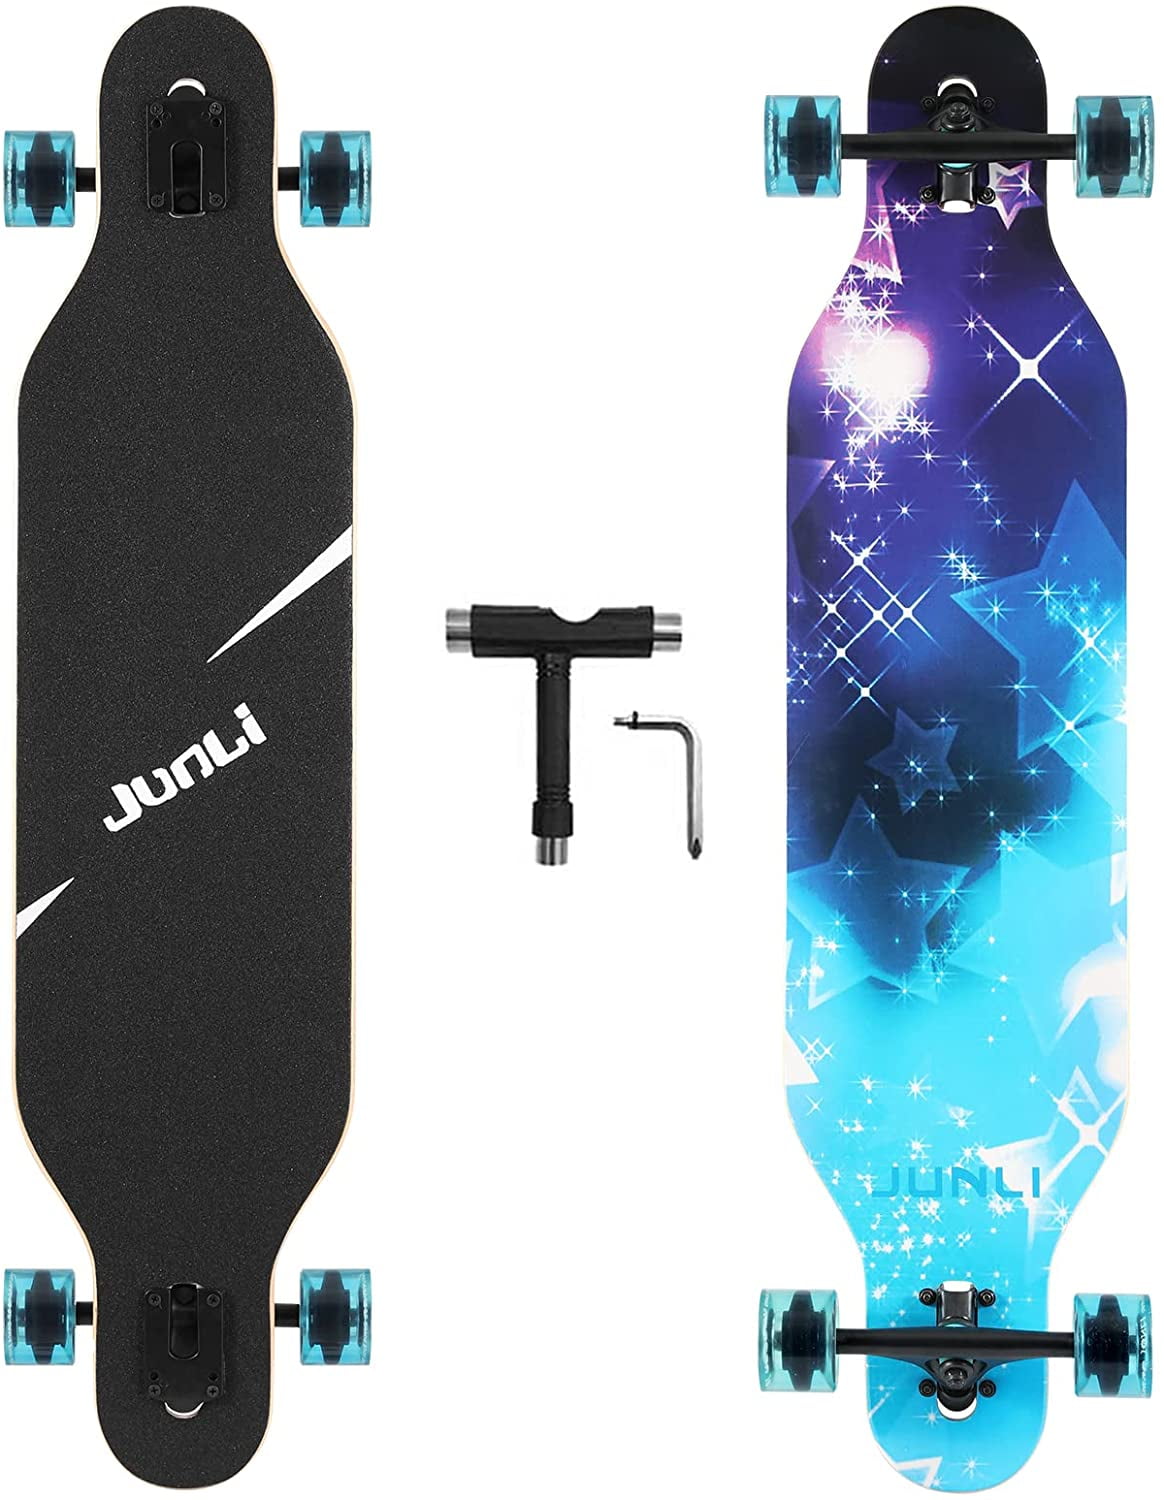 Carving Free-Style and Downhill Junli 41 Inch Freeride Skateboard Longboard Complete Skateboard Cruiser for Cruising